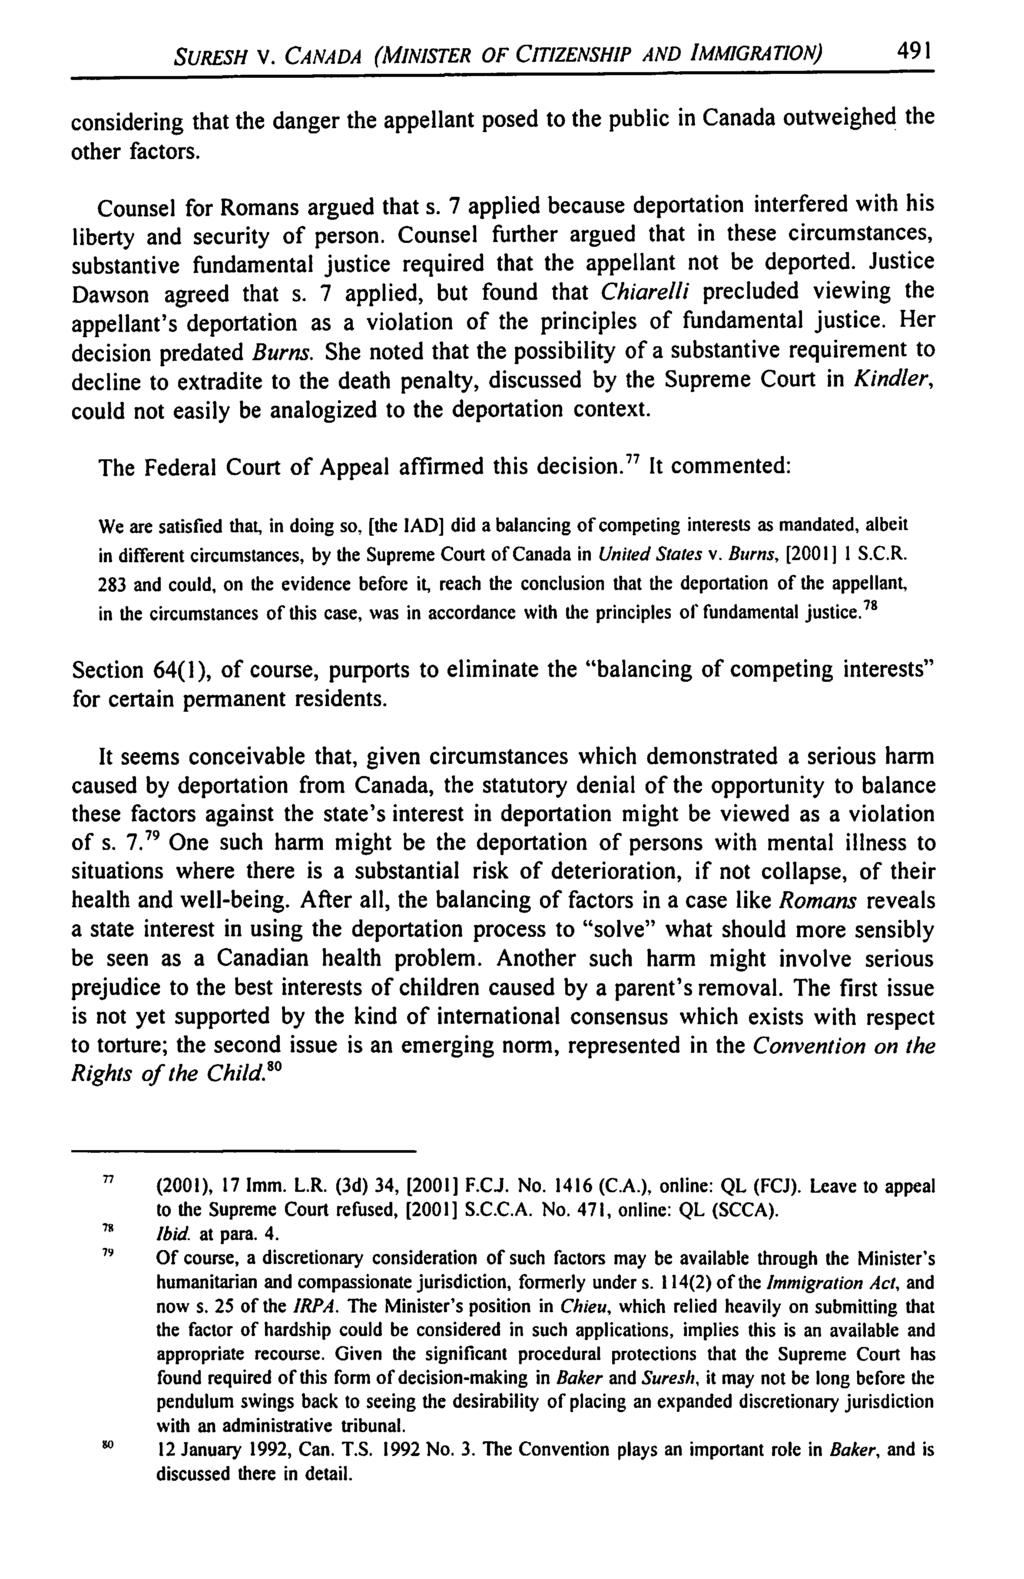 SURESH V. CANADA (MINISTER OF CITIZENSHIP AND IMMIGRATION} 491 considering that the danger the appellant posed to the public in Canada outweighed the other factors. Counsel for Romans argued thats.